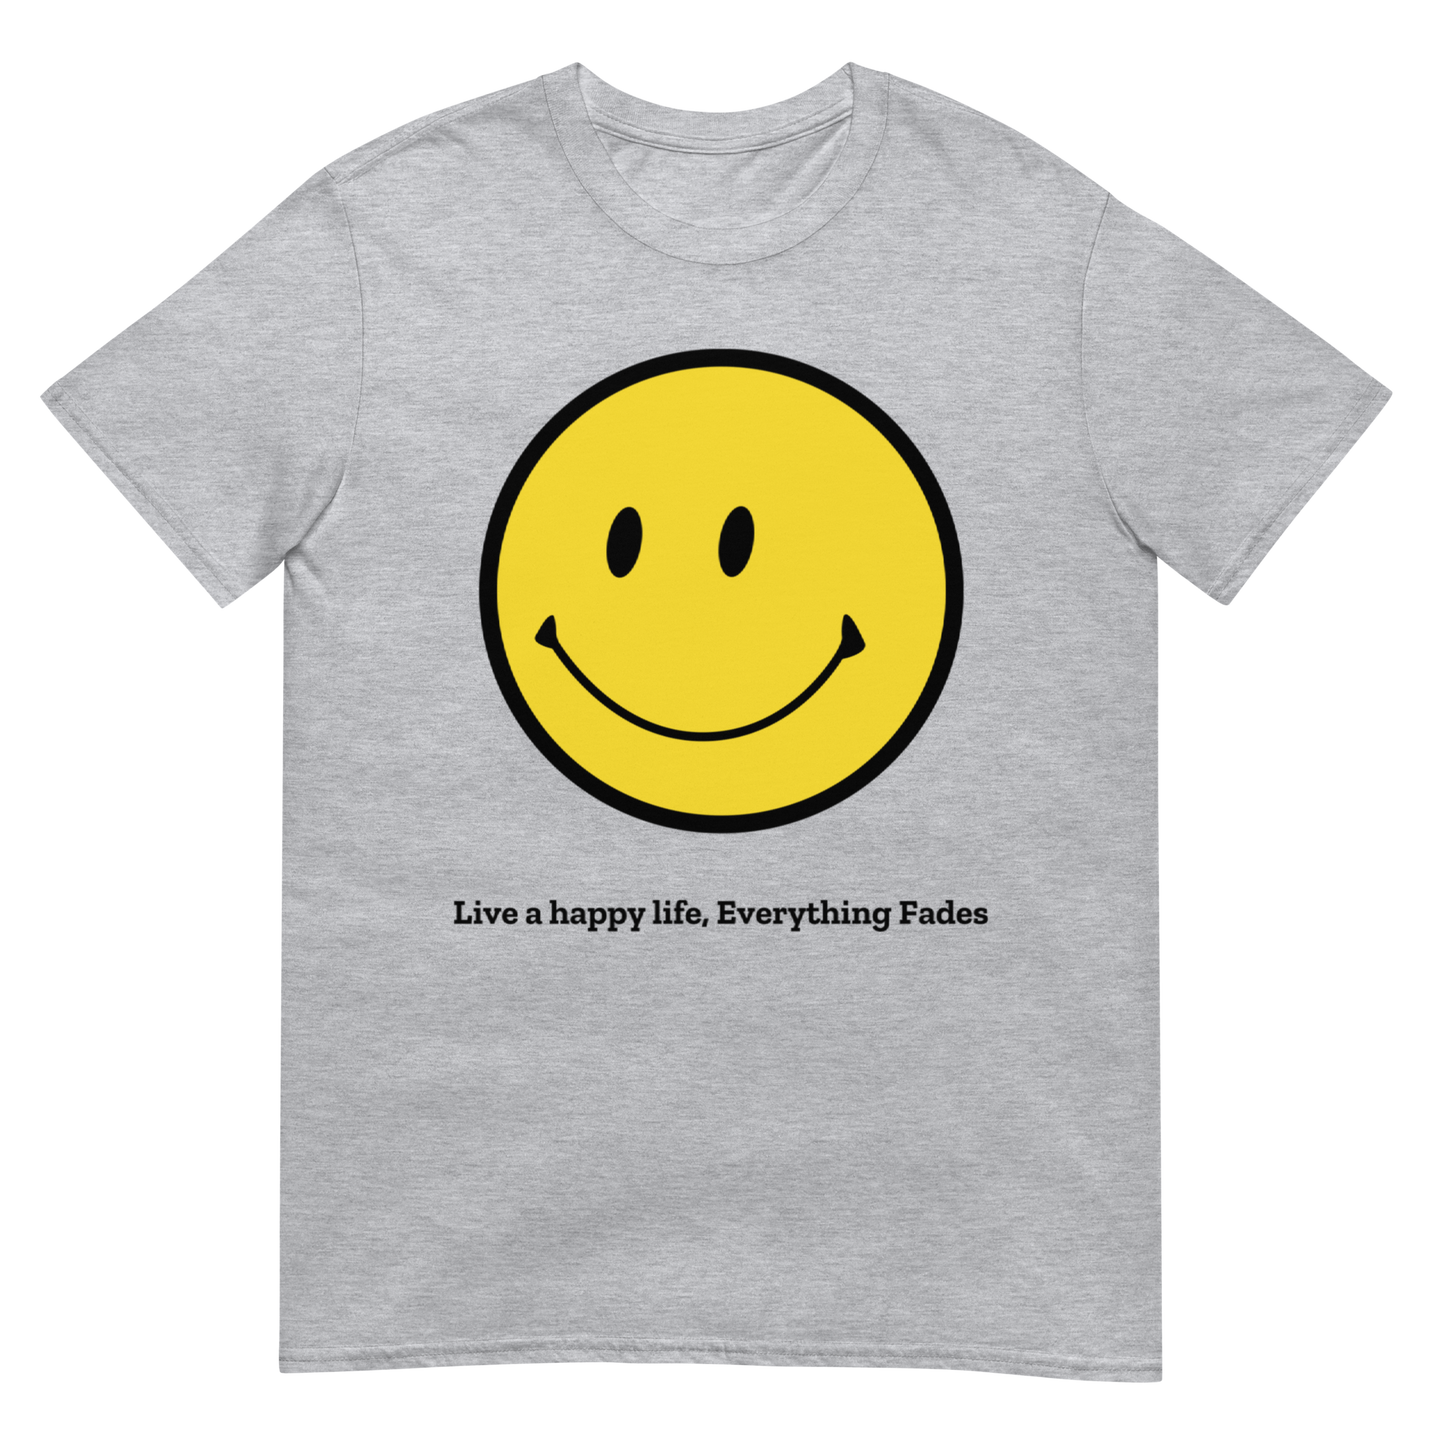 Smiley "Live a happy life, Everything Fades" T-Shirt